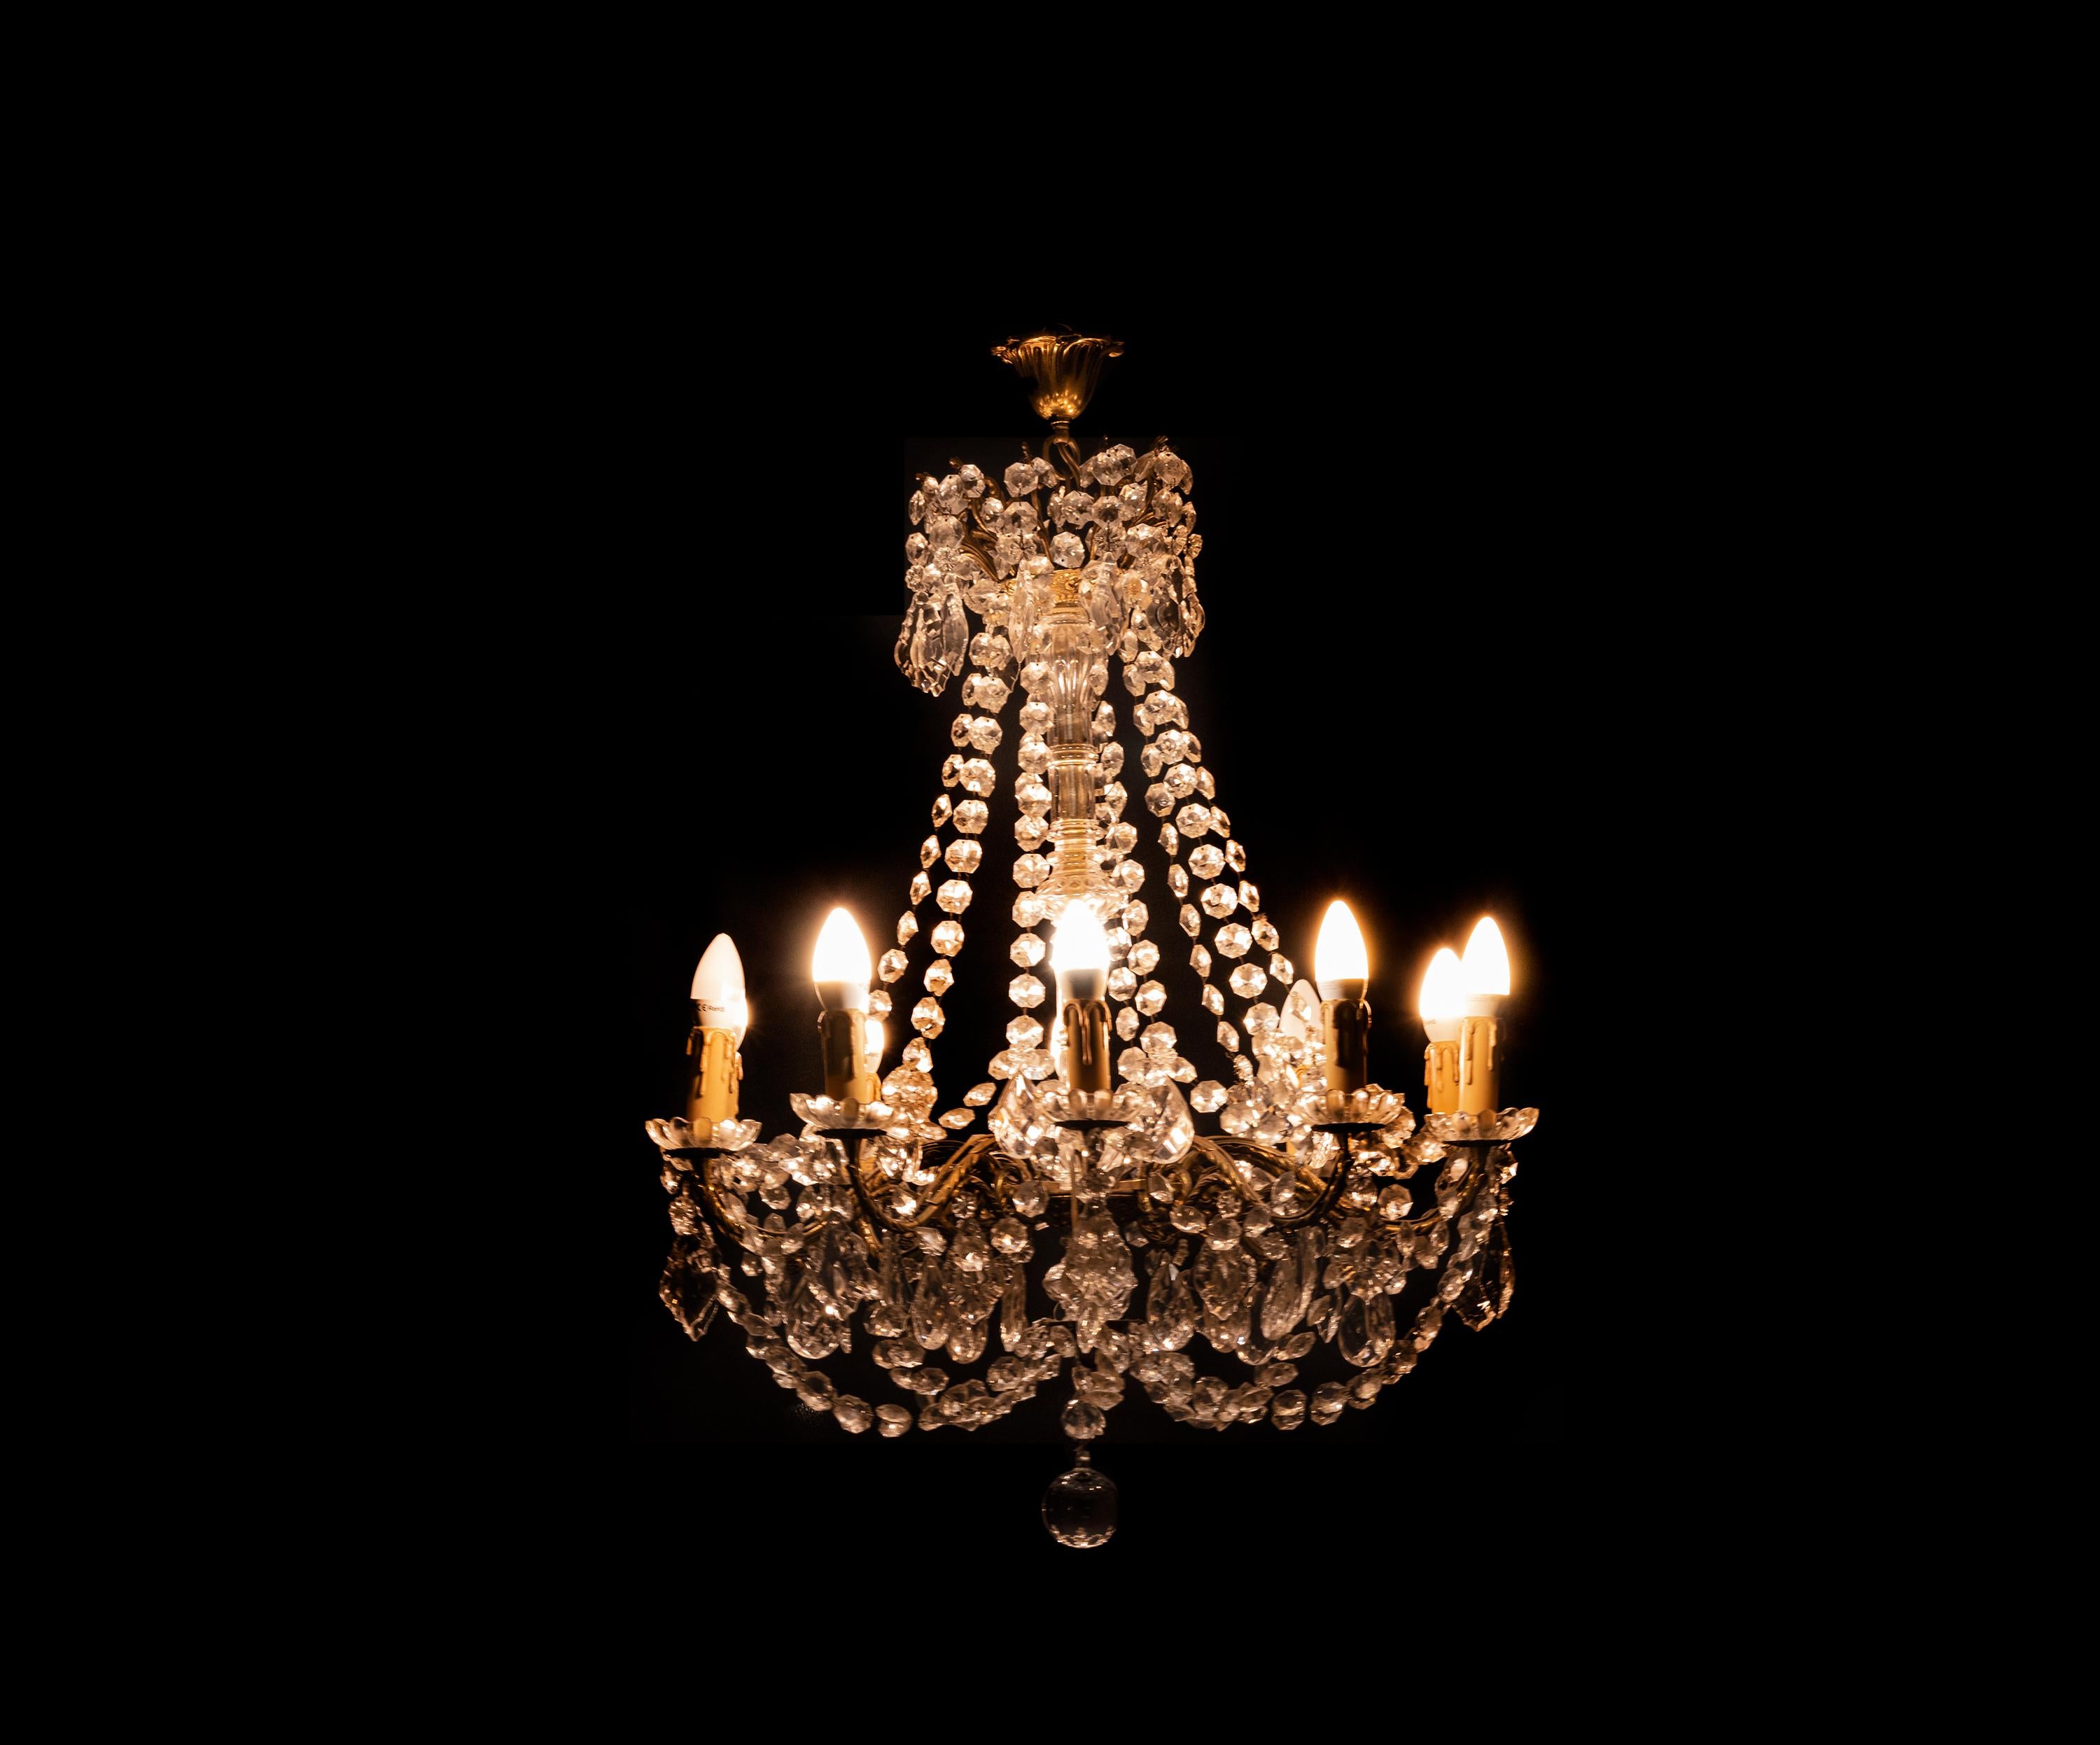 A gilt bronze Crystal and glass chandelier in the Louis XV Style with ten arms. 
Recently rewired with ten illuminants. 
Ready to hang in your selling.

The chandelier is currently wired for both European Union and US standards LED lights. The LED